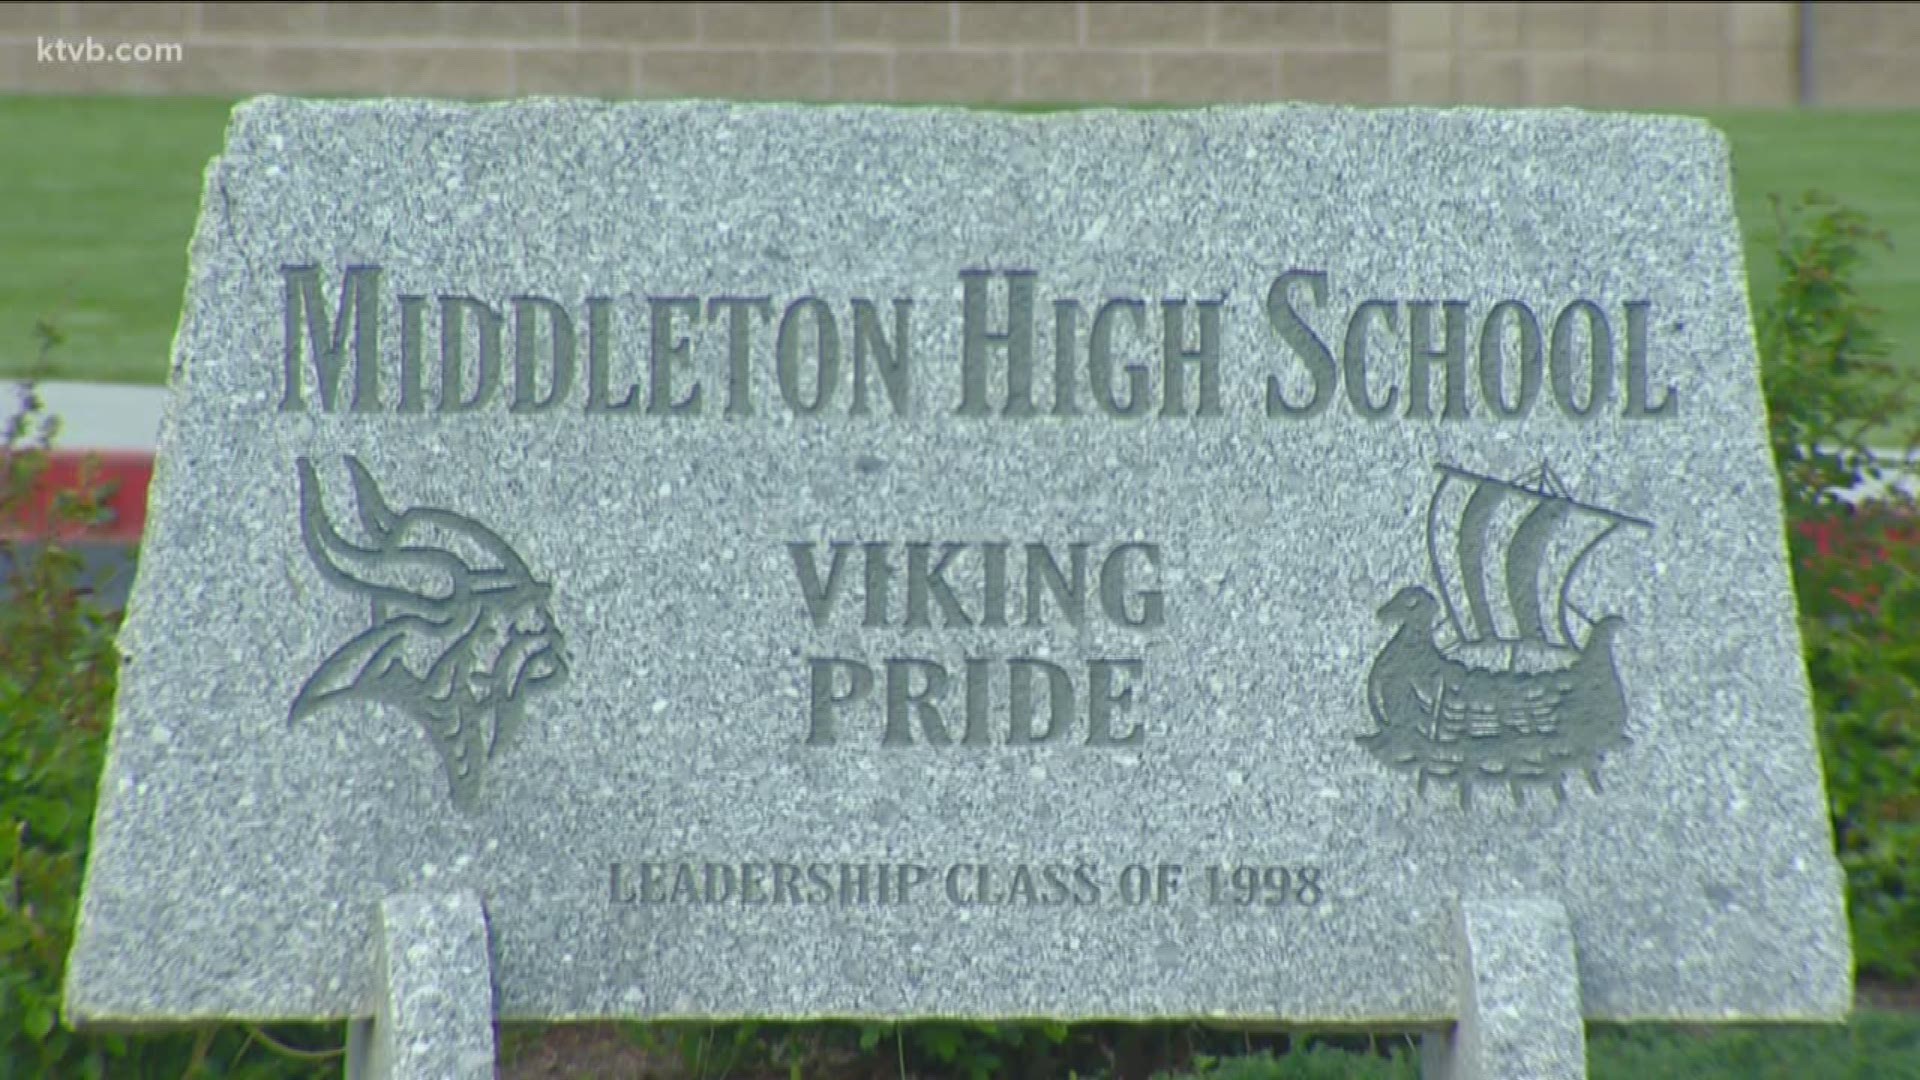 The school district has dealt with a series of controversies for the last few months, and now parents are upset after it was decided the high school principal won't be returning.